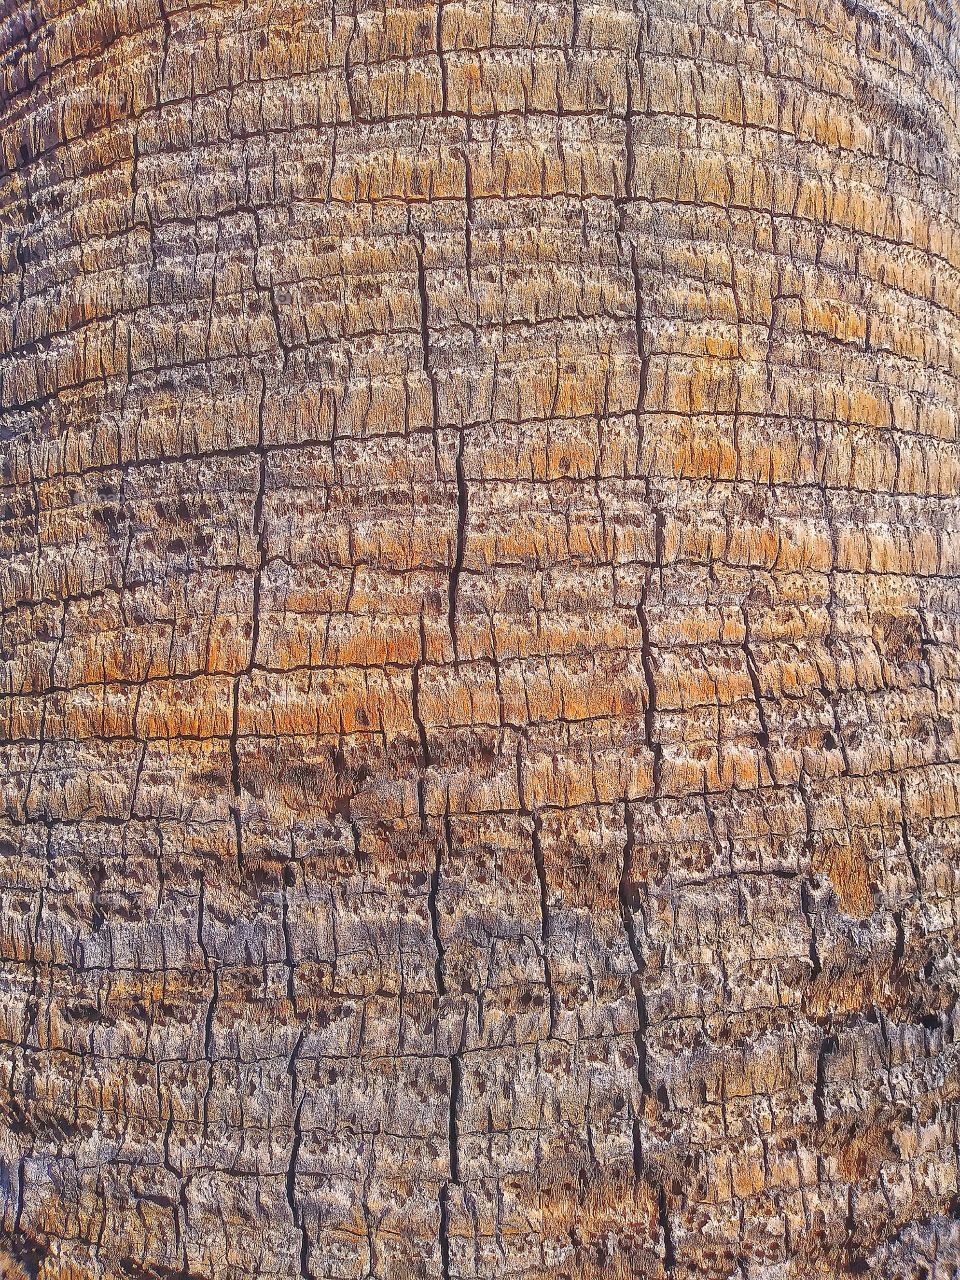 Awesome Closeup Macro Shot of Tree Bark from Palm Tree with Intricate Texture Detail and Textured Lines Looking Like Cracks and Crevices or Dry Cracked Earth